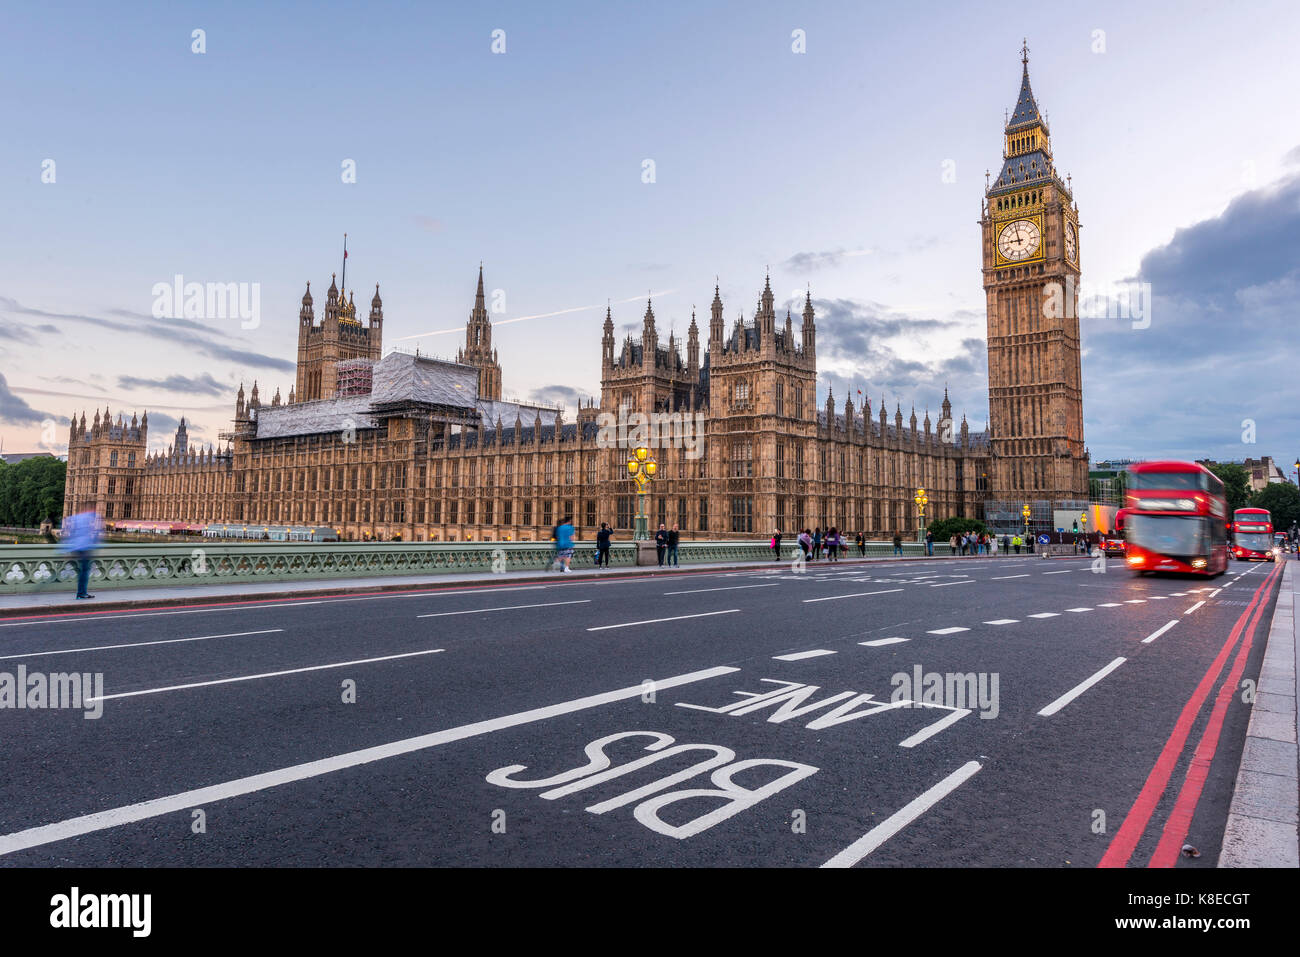 Double Decker Bus auf die Westminster Bridge, Westminster Palace, Houses of Parliament, Big Ben, Westminster, London, England Stockfoto